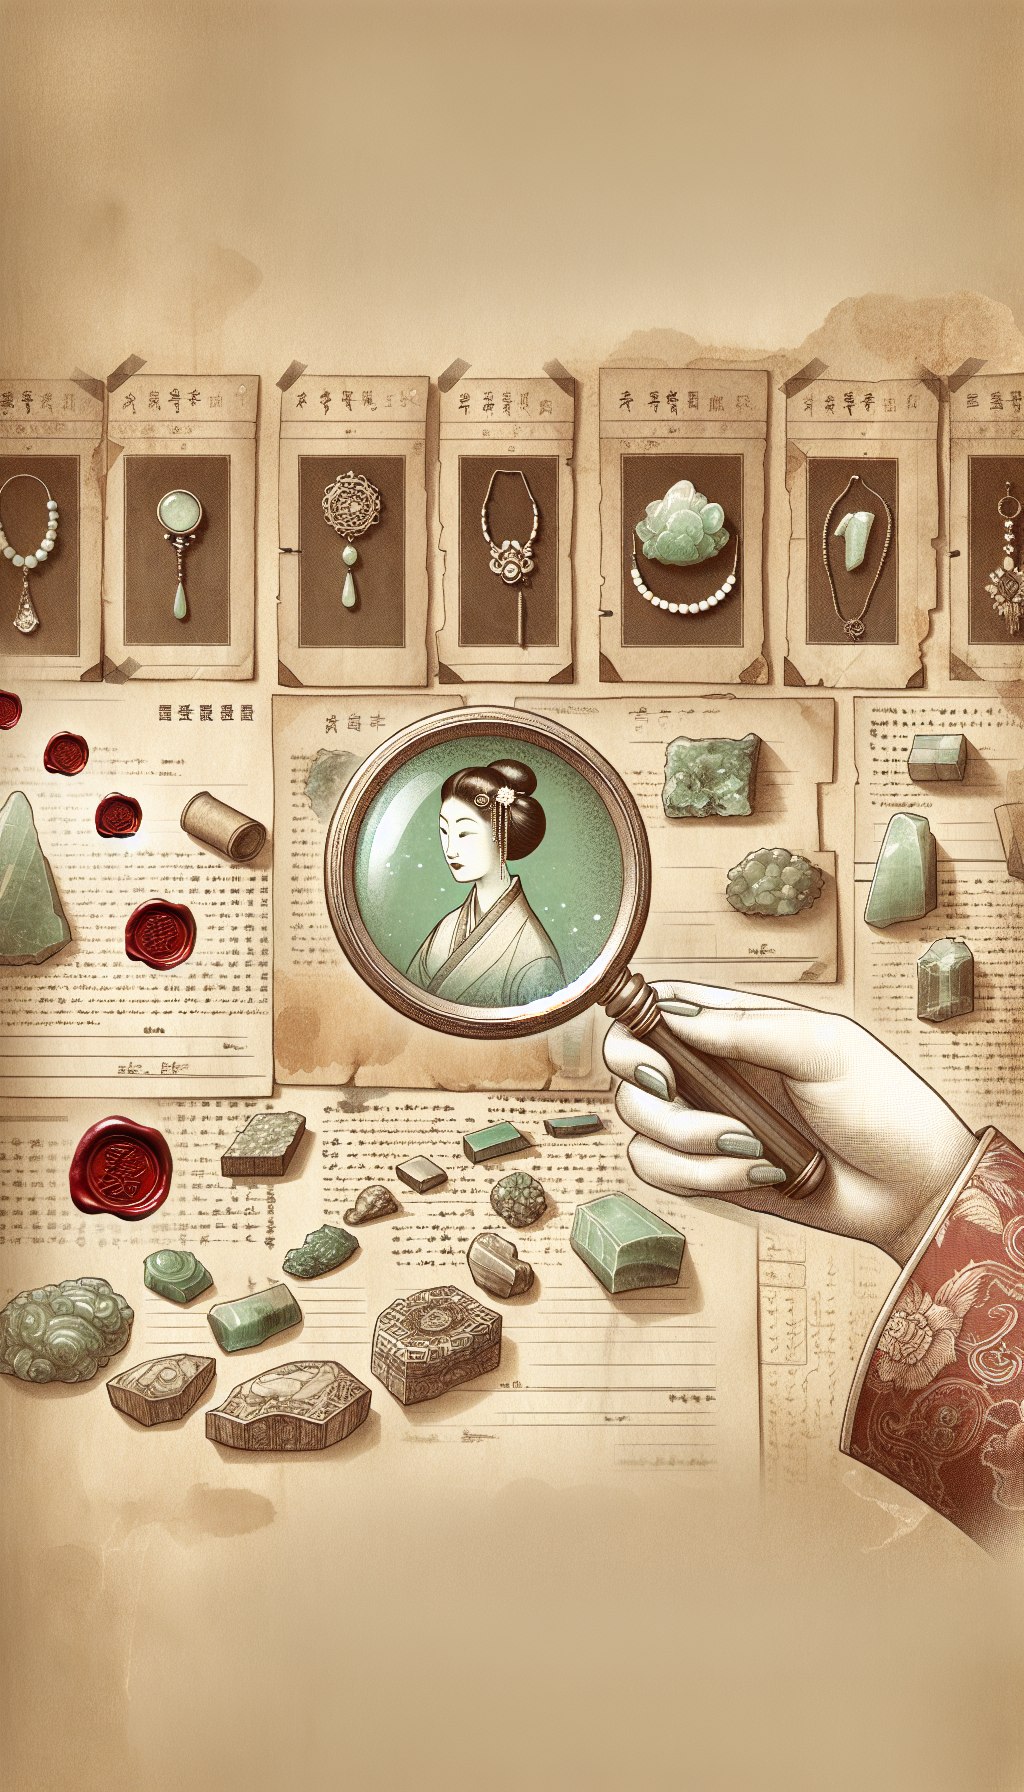 A whimsical, sepia-toned illustration depicts a magnifying glass held by an antique-dressed hand, with intricate jade jewelry pieces lined like a path beneath. Each jewel transitions in style, reflecting its unique historical era. In the background, faded documents with red seals float, symbolizing the journey of provenance as the cornerstone of jade appraisal.